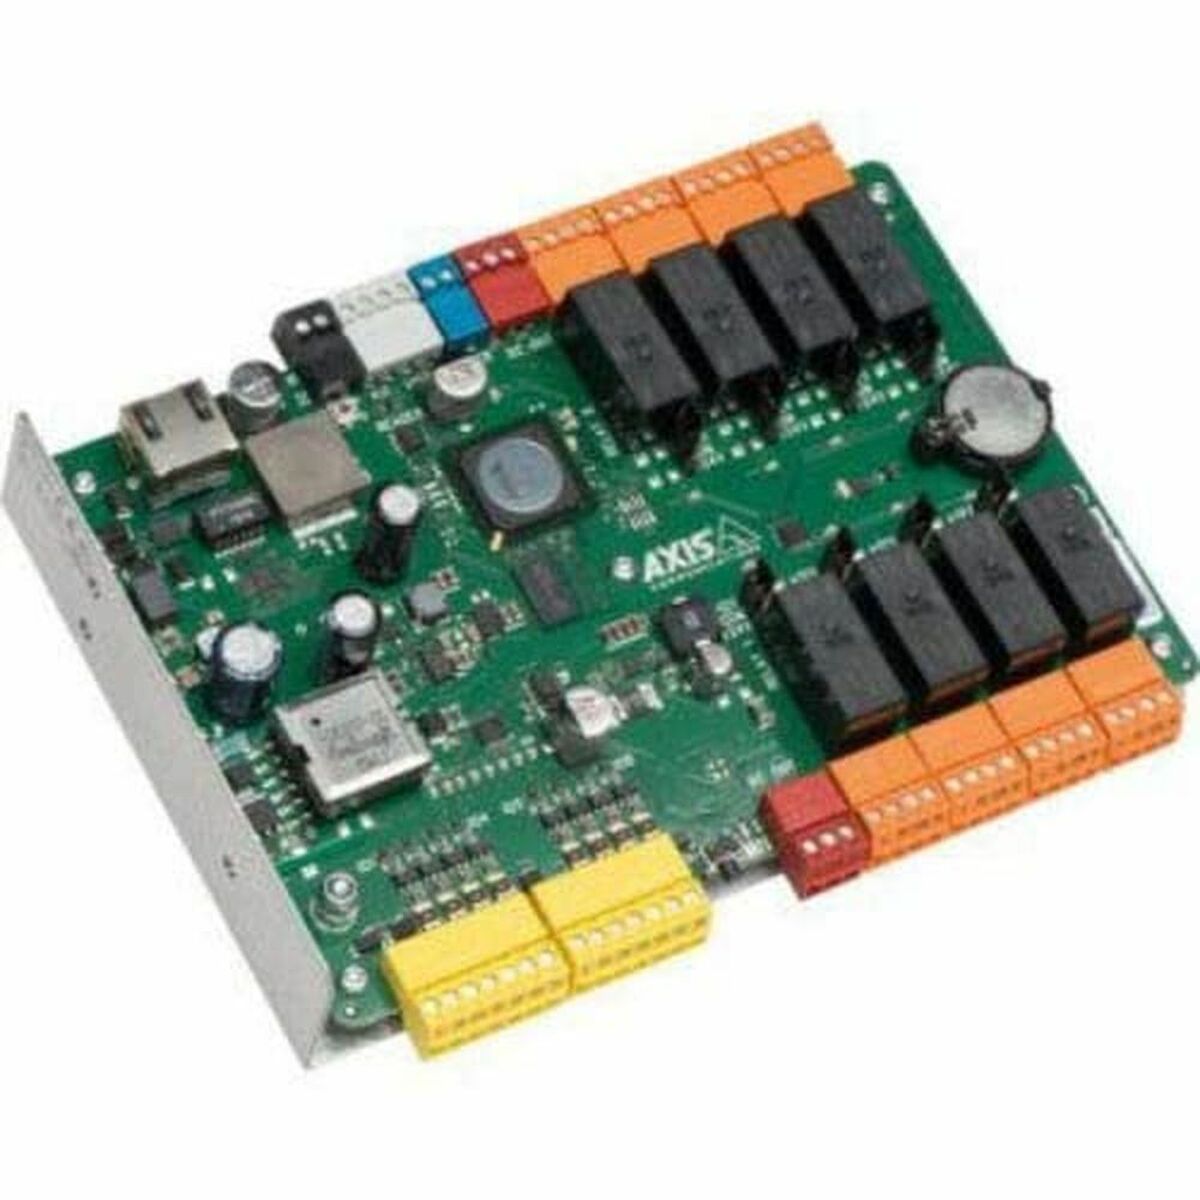 Relay Module Axis 0820-001 12 - 24 V, Axis, Computing, Network devices, relay-module-axis-0820-001-12-24-v, Brand_Axis, category-reference-2609, category-reference-2803, category-reference-2821, category-reference-t-19685, category-reference-t-19914, Condition_NEW, networks/wiring, Price_700 - 800, RiotNook